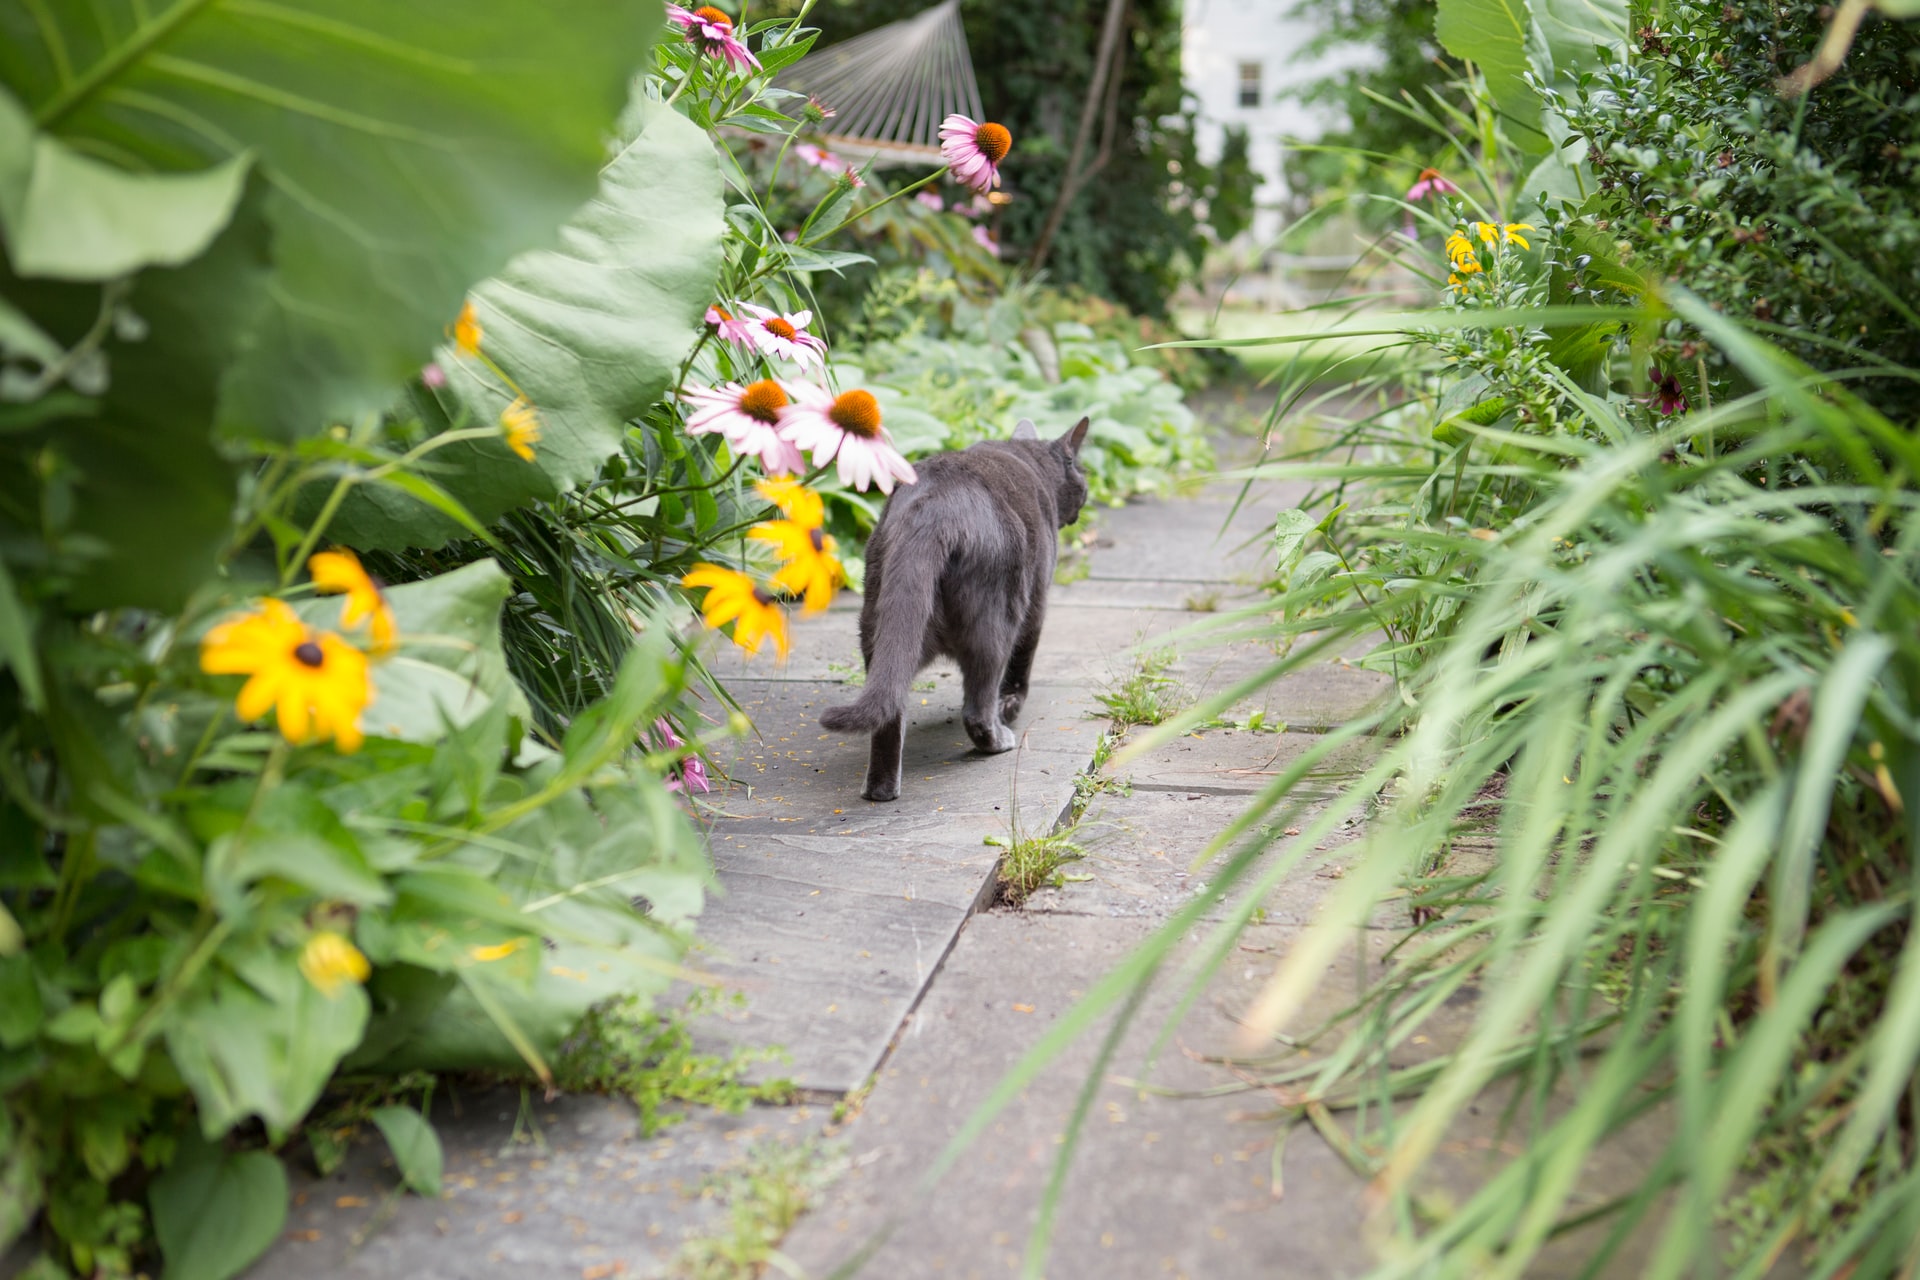 How to keep cats out of the garden - David Suzuki Foundation